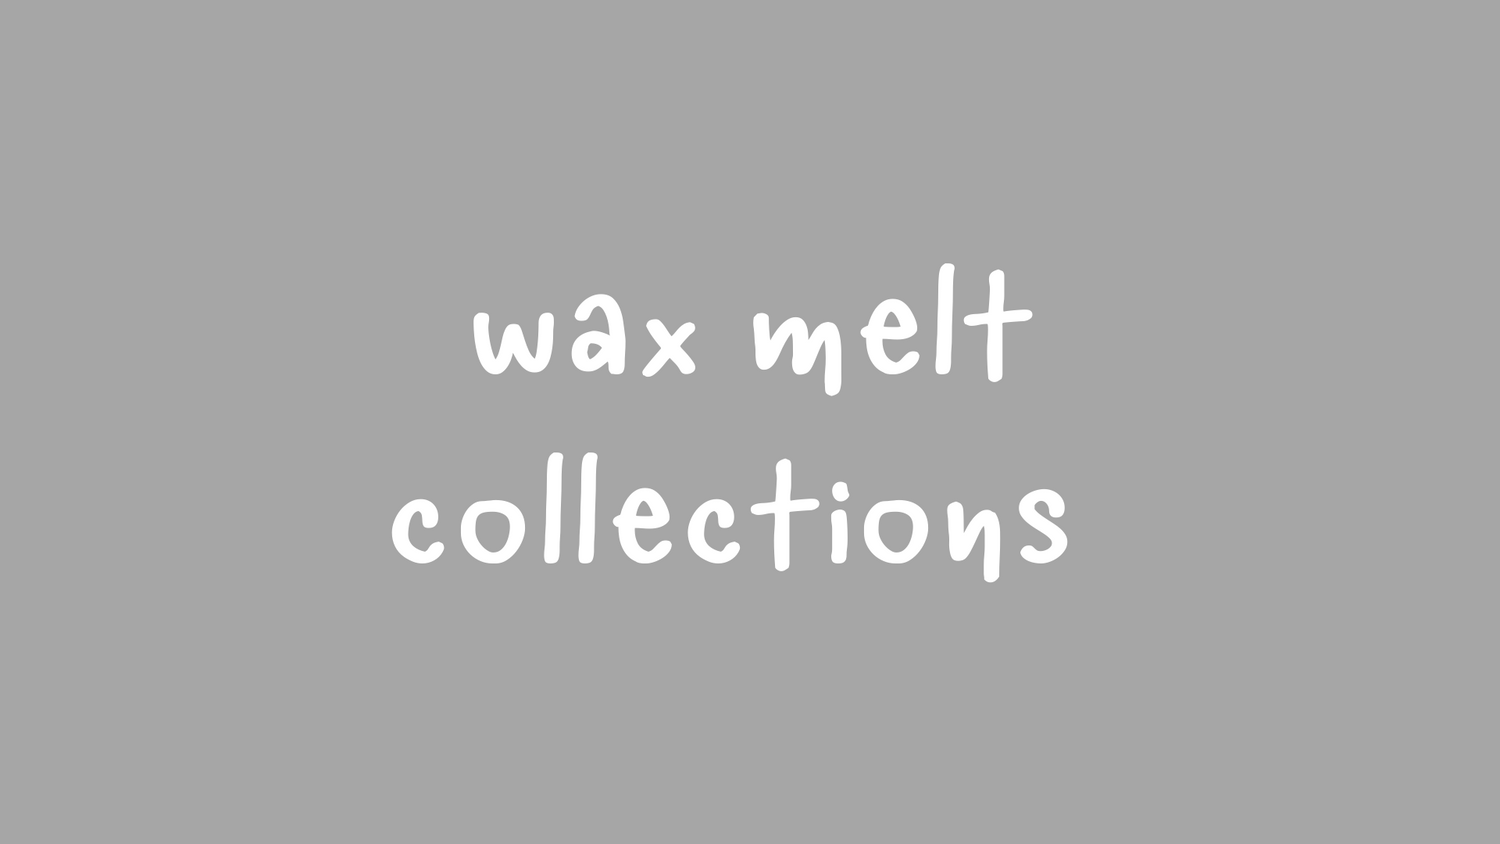 WAX MELT COLLECTIONS